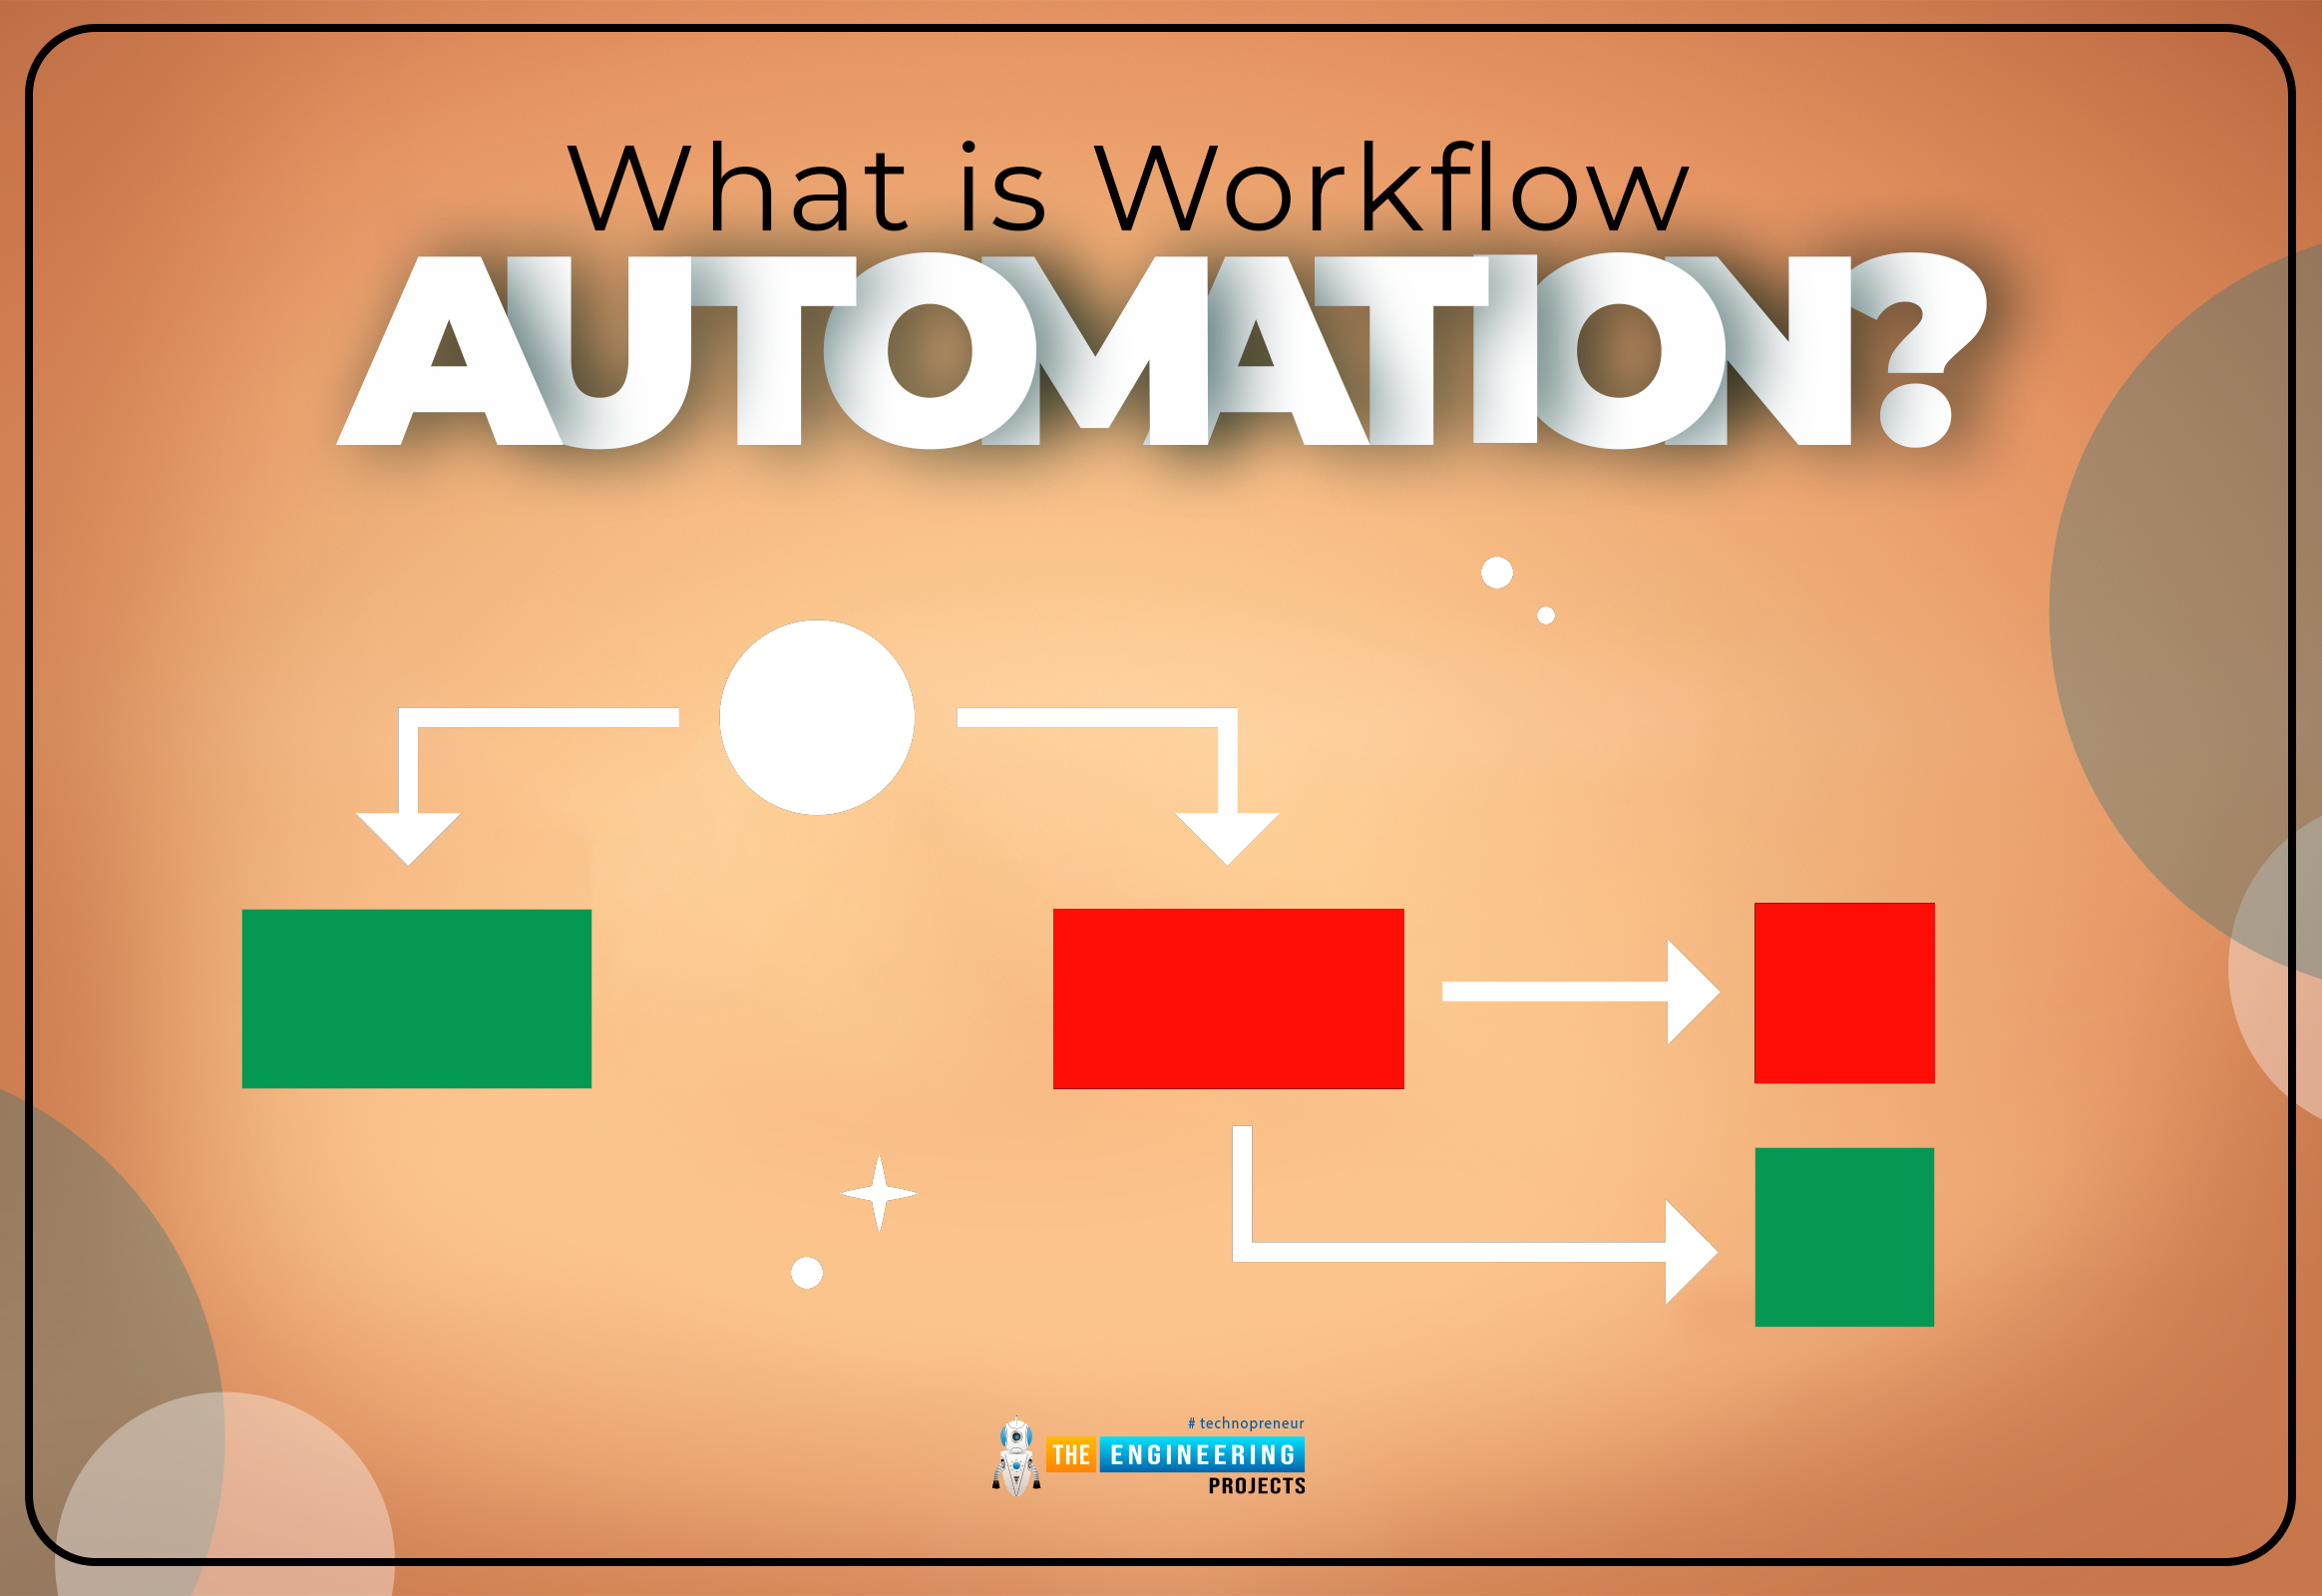 Introduction to Workflow Automation, what is workflow automation, workflow automation, workflow automation benefits, workflow automation basics